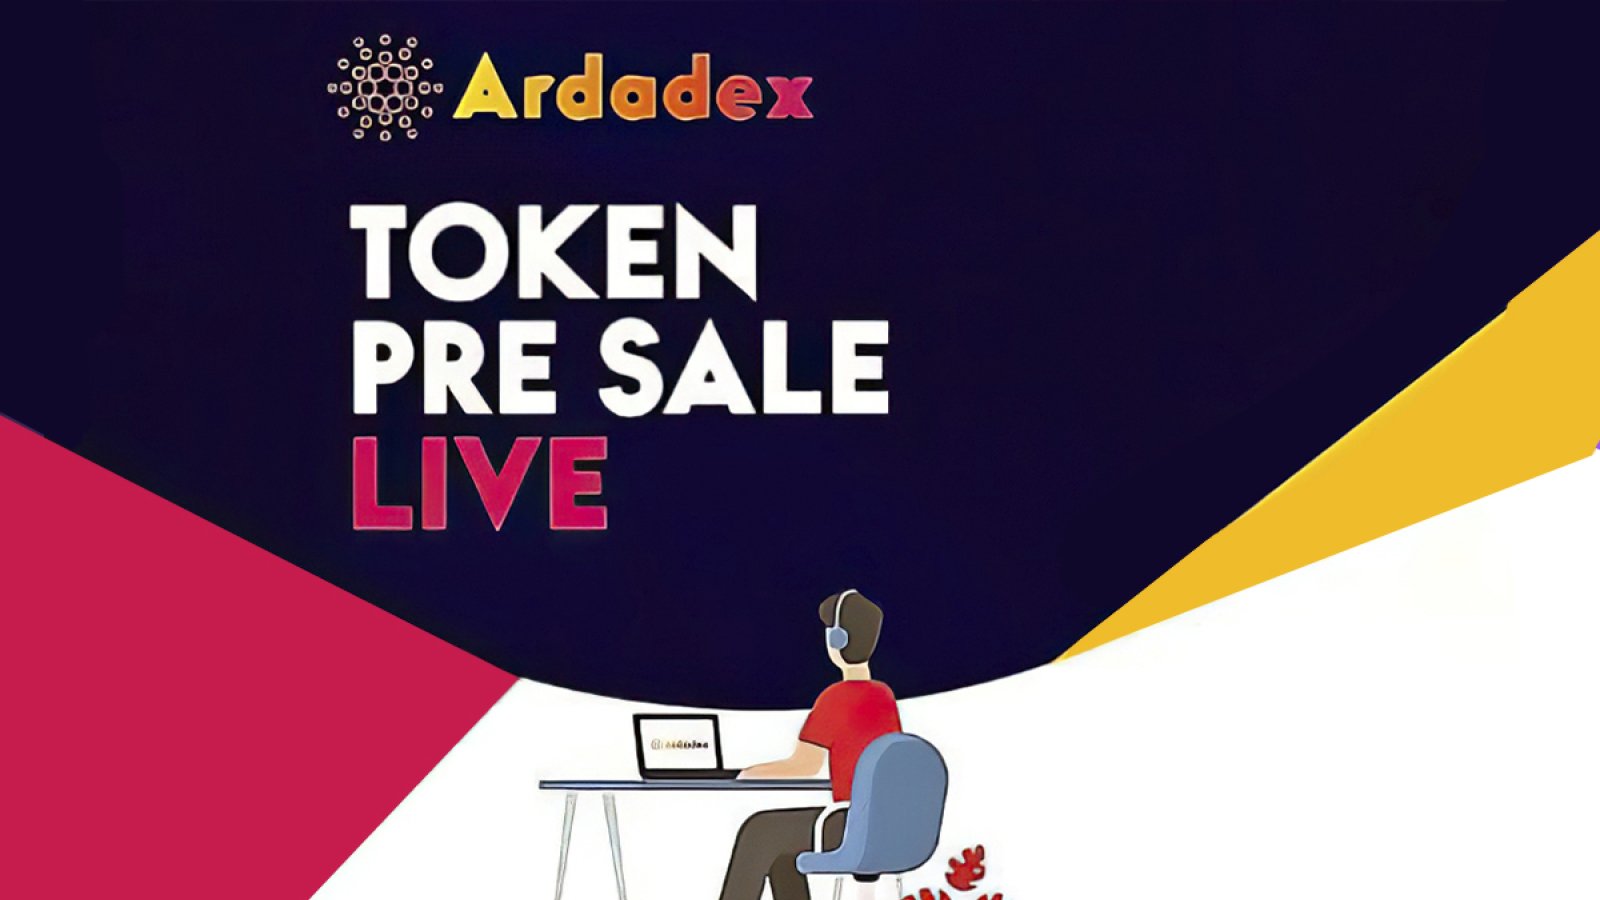 Ardadex Announces That Ardan Token Is Now Available for Purchase